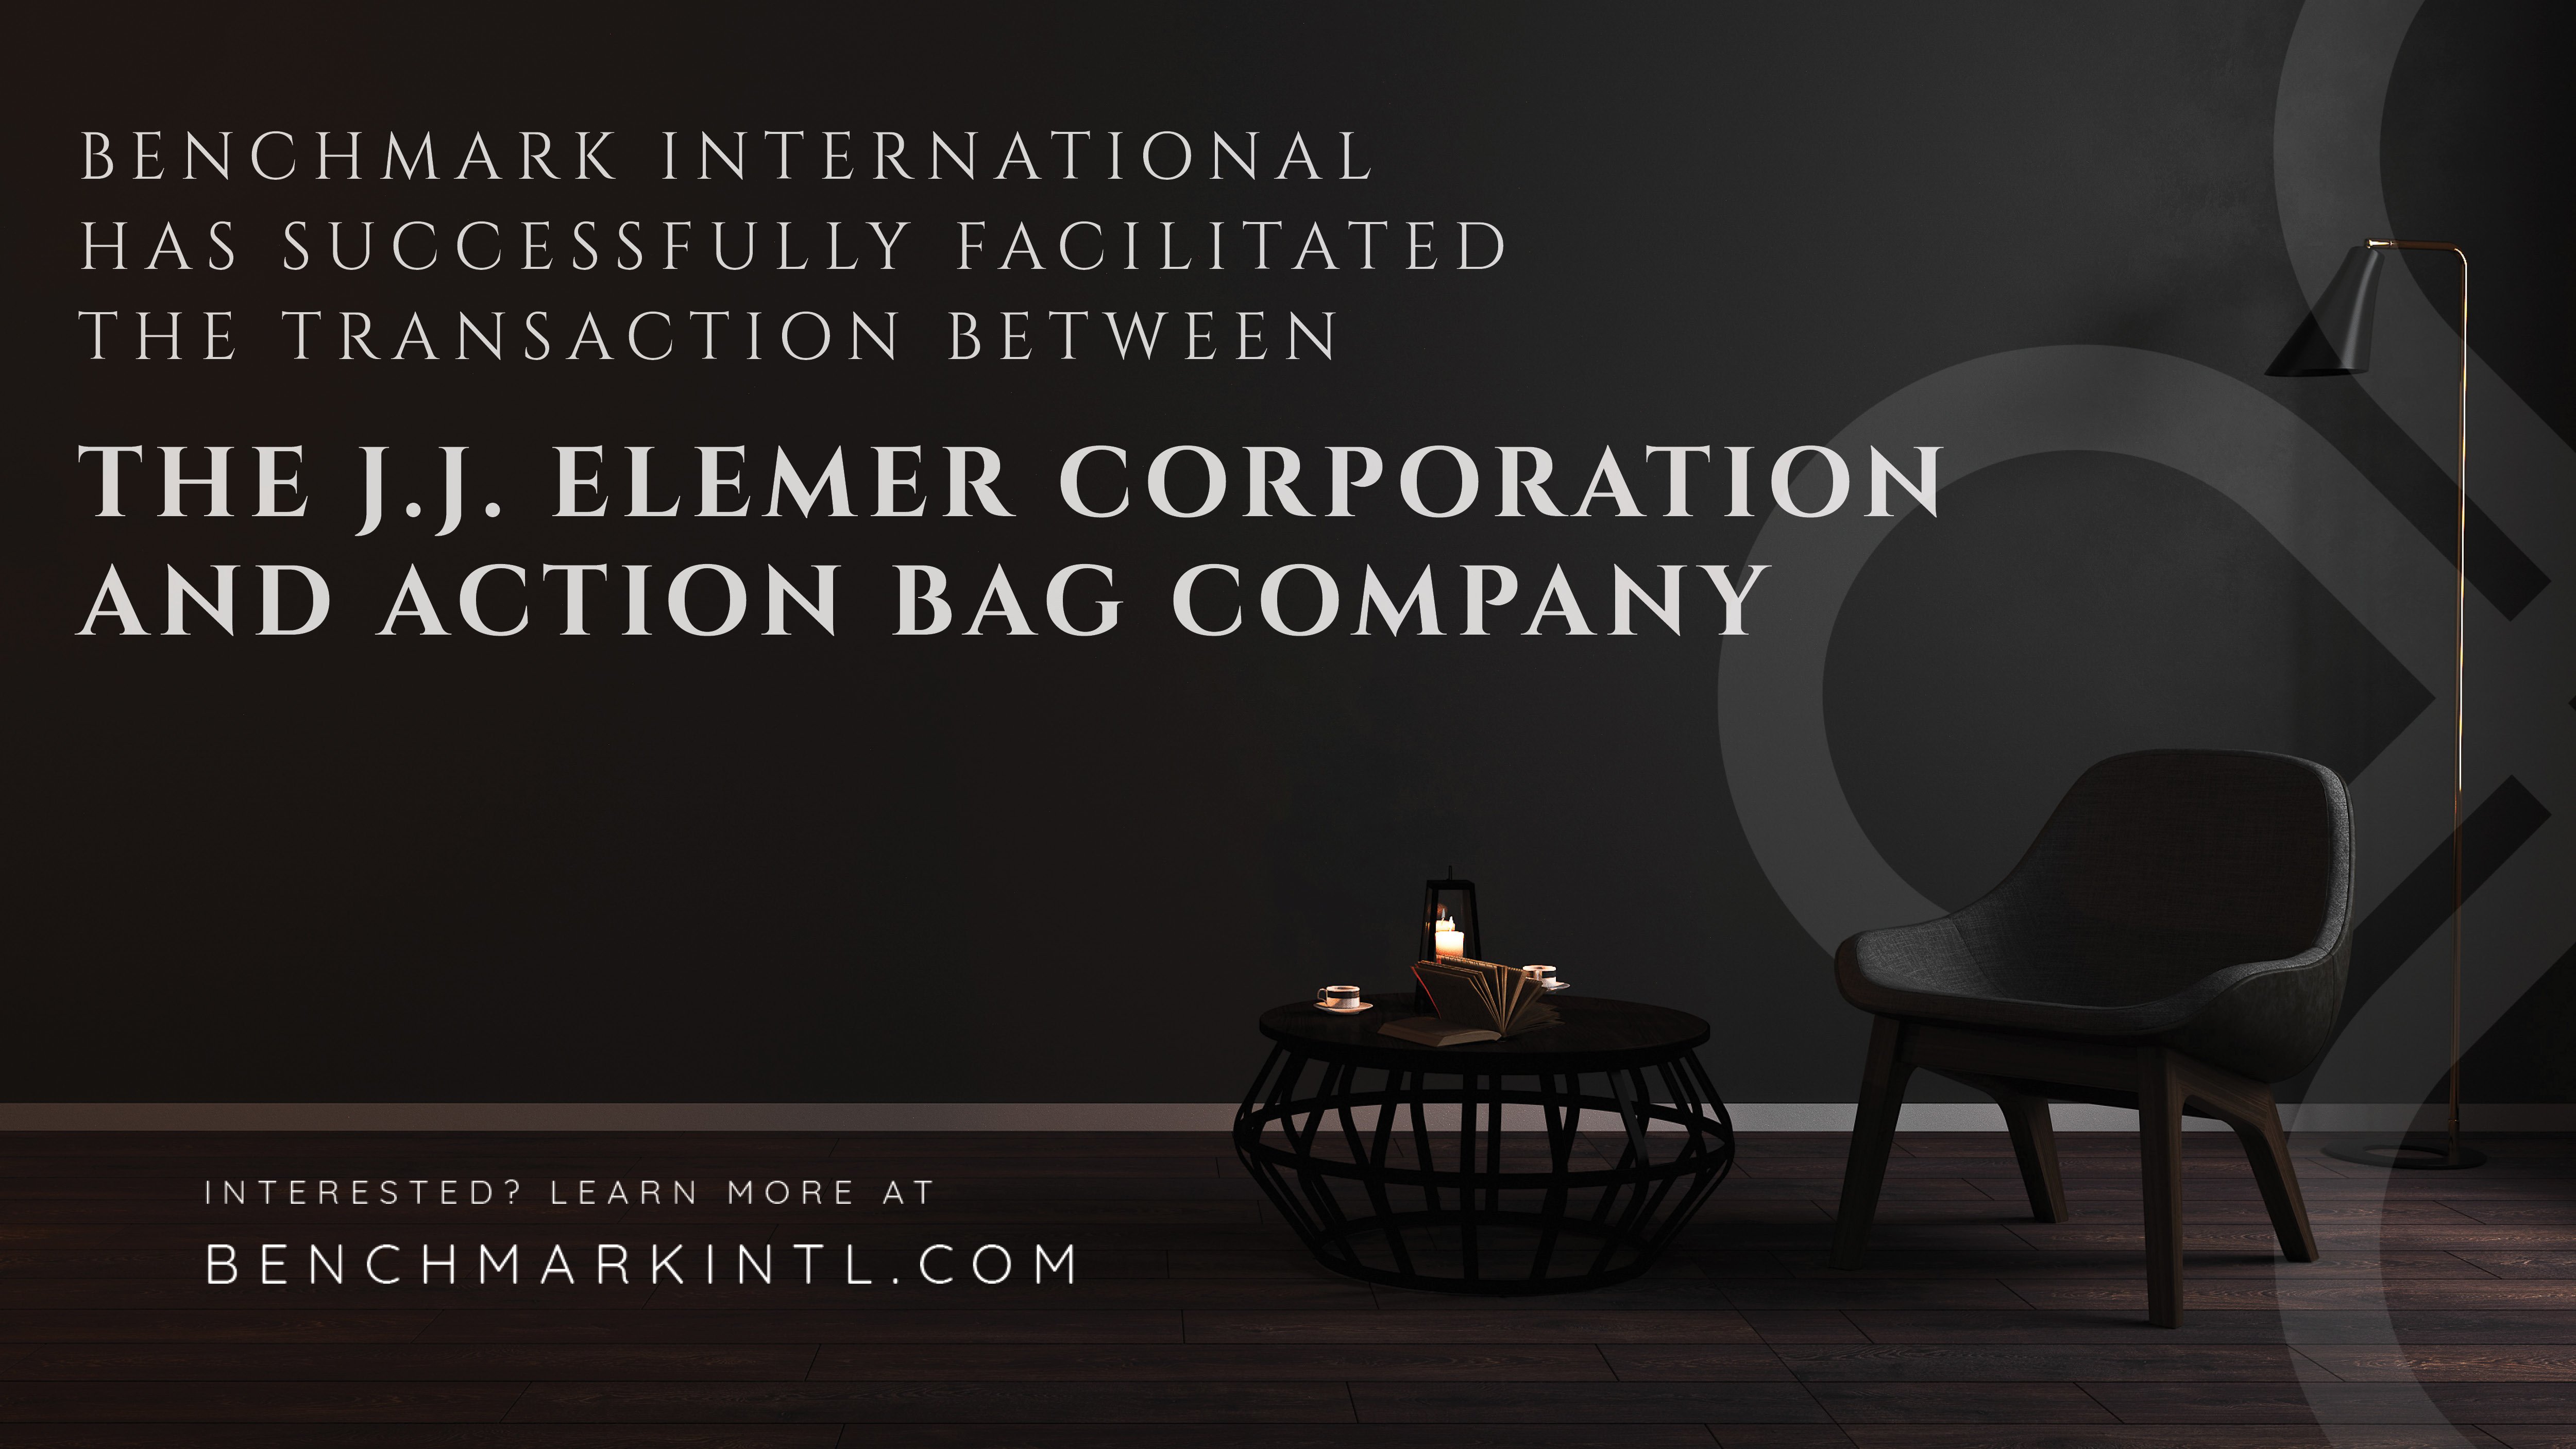 Benchmark International Successfully Facilitated The Acquisition Of The J.J. Elemer Corporation By Action Bag Company